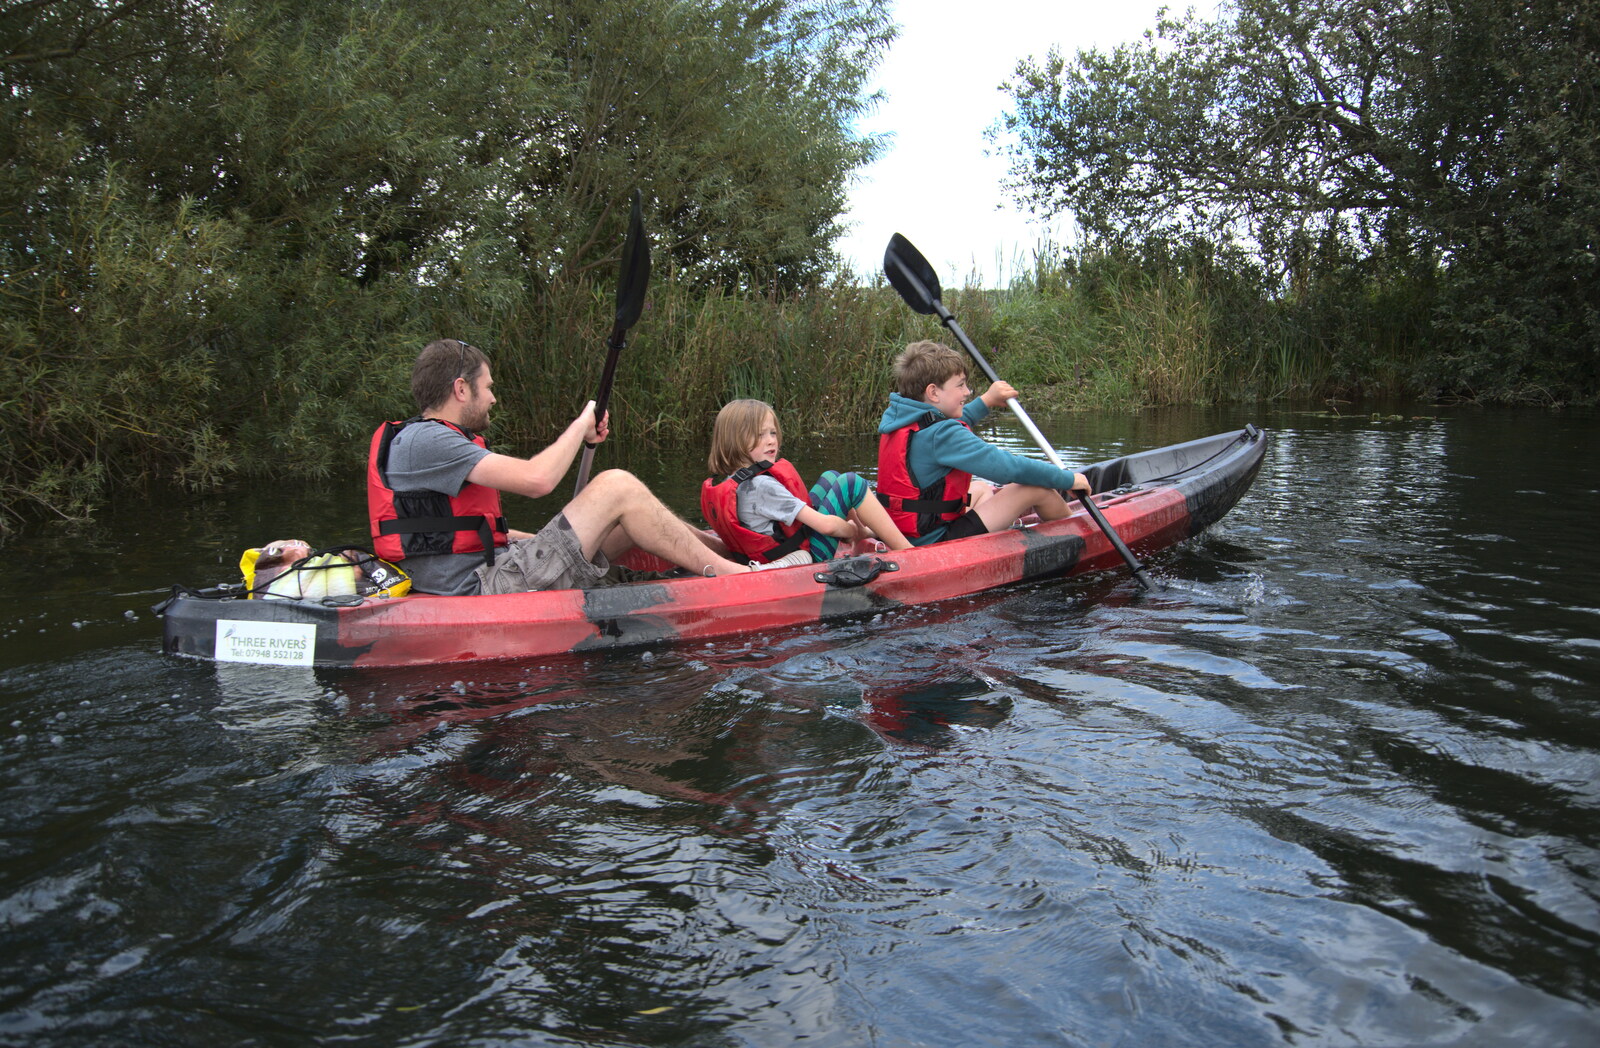 Camping at Three Rivers, Geldeston, Norfolk - 5th September 2020: The Boy Phil and Fred paddle an open kayak